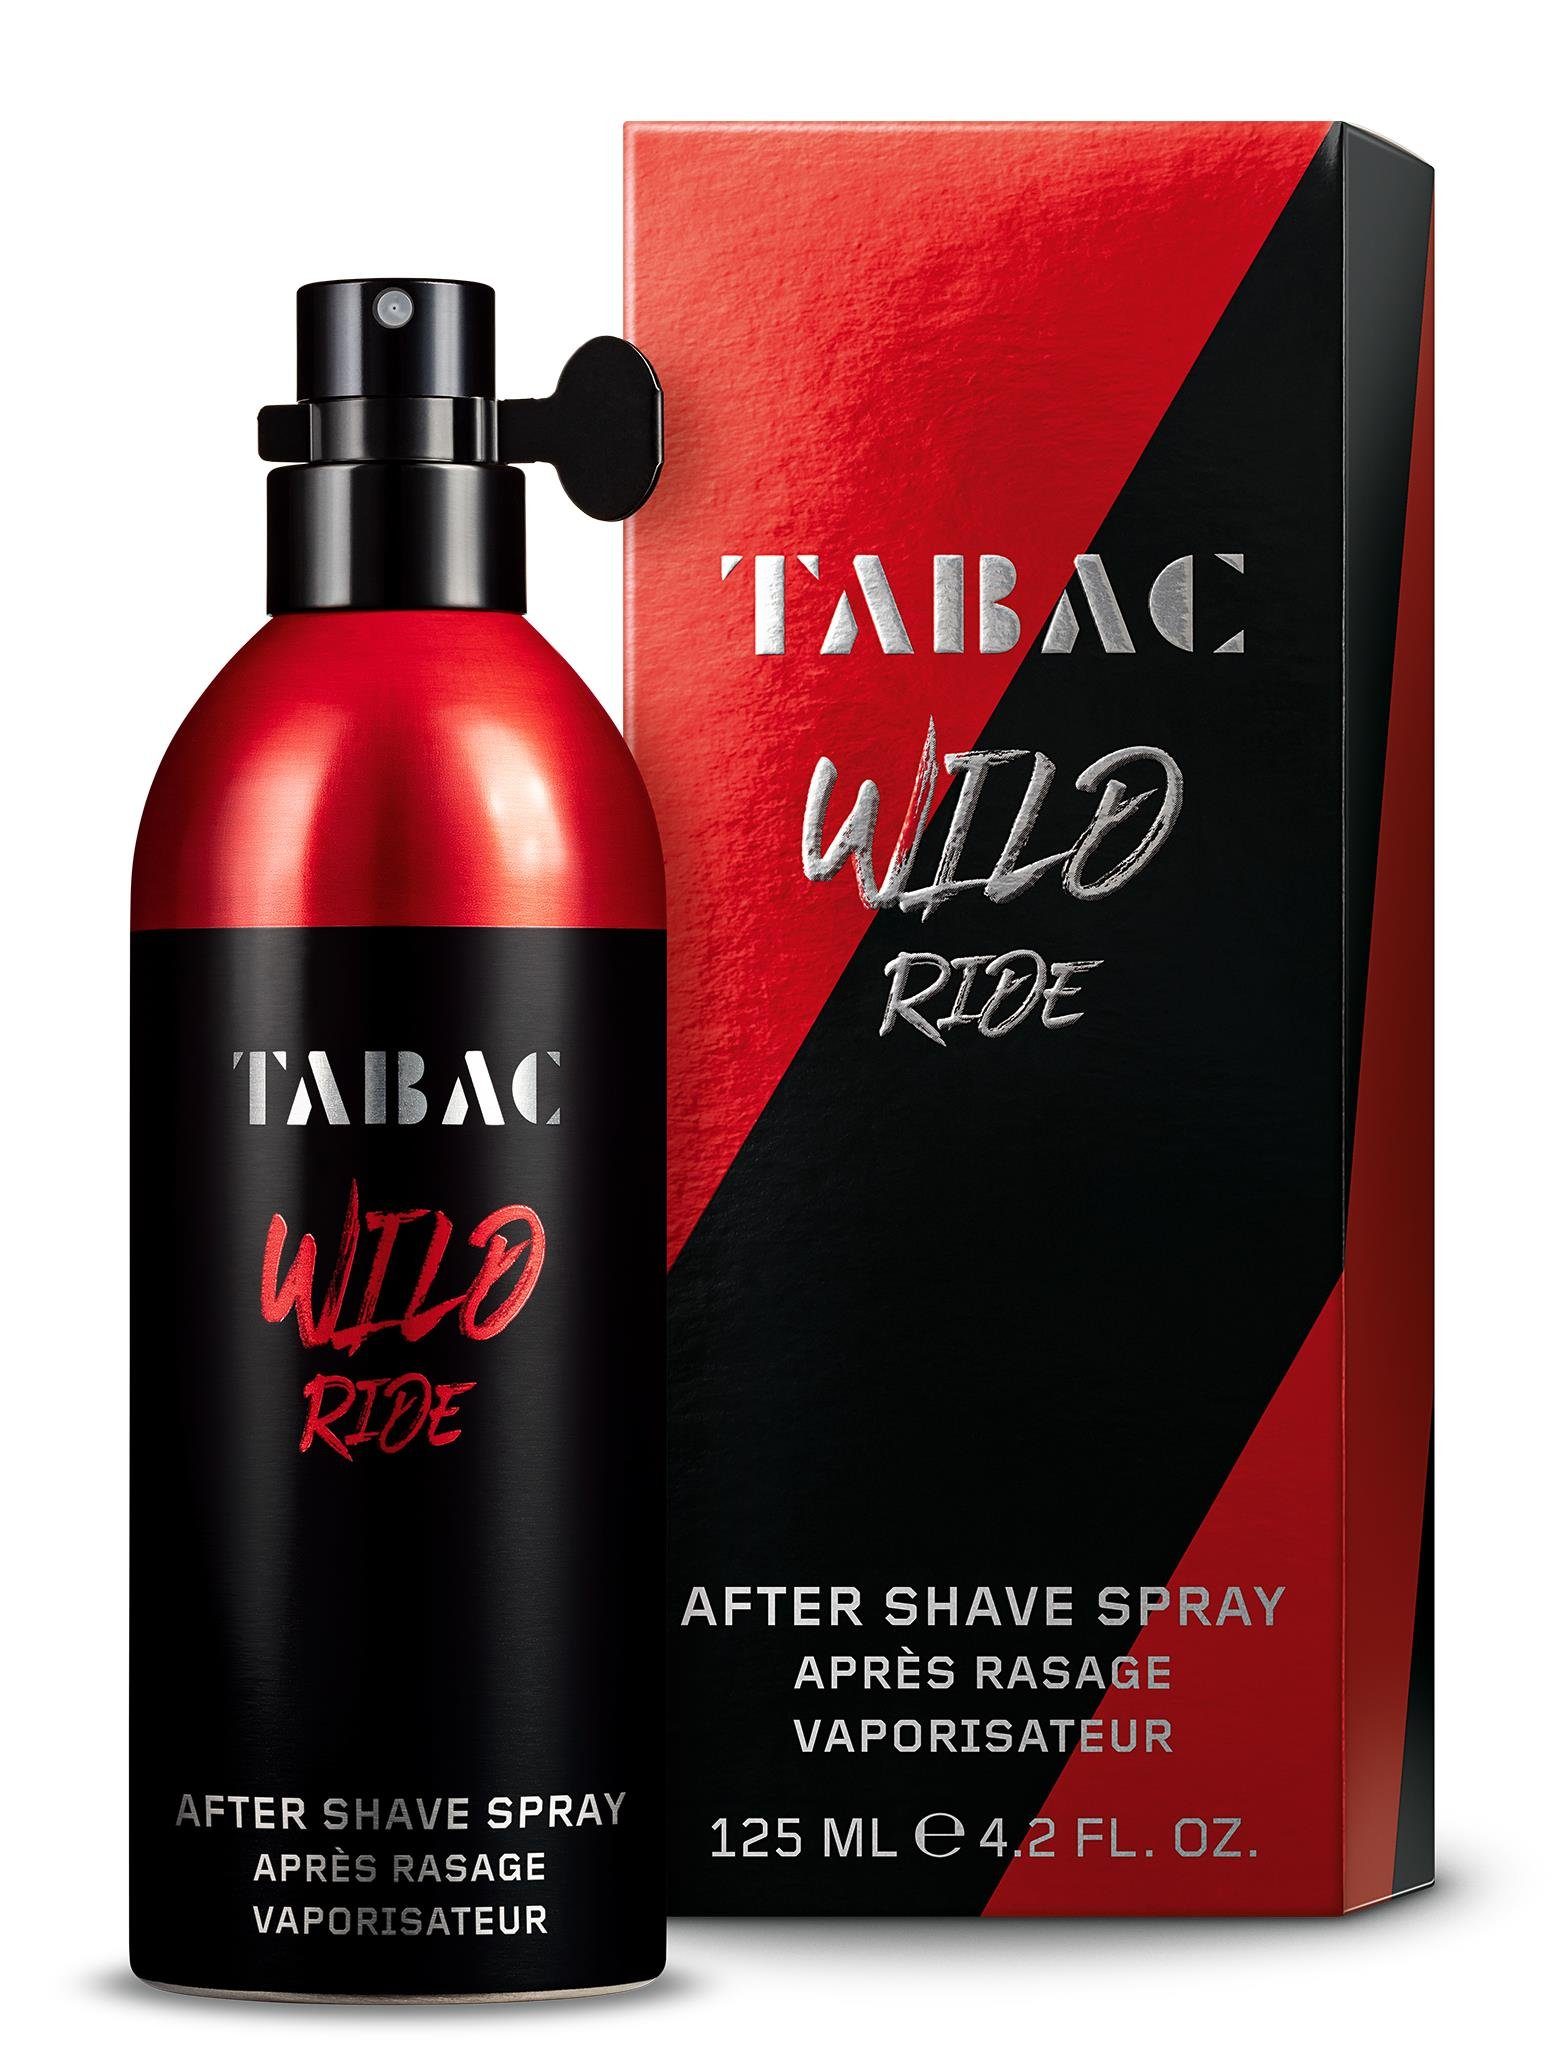 After Shave Ride Wild ml 125 Tabac Tabac Ride Lotion Gesichts-Reinigungslotion Wild